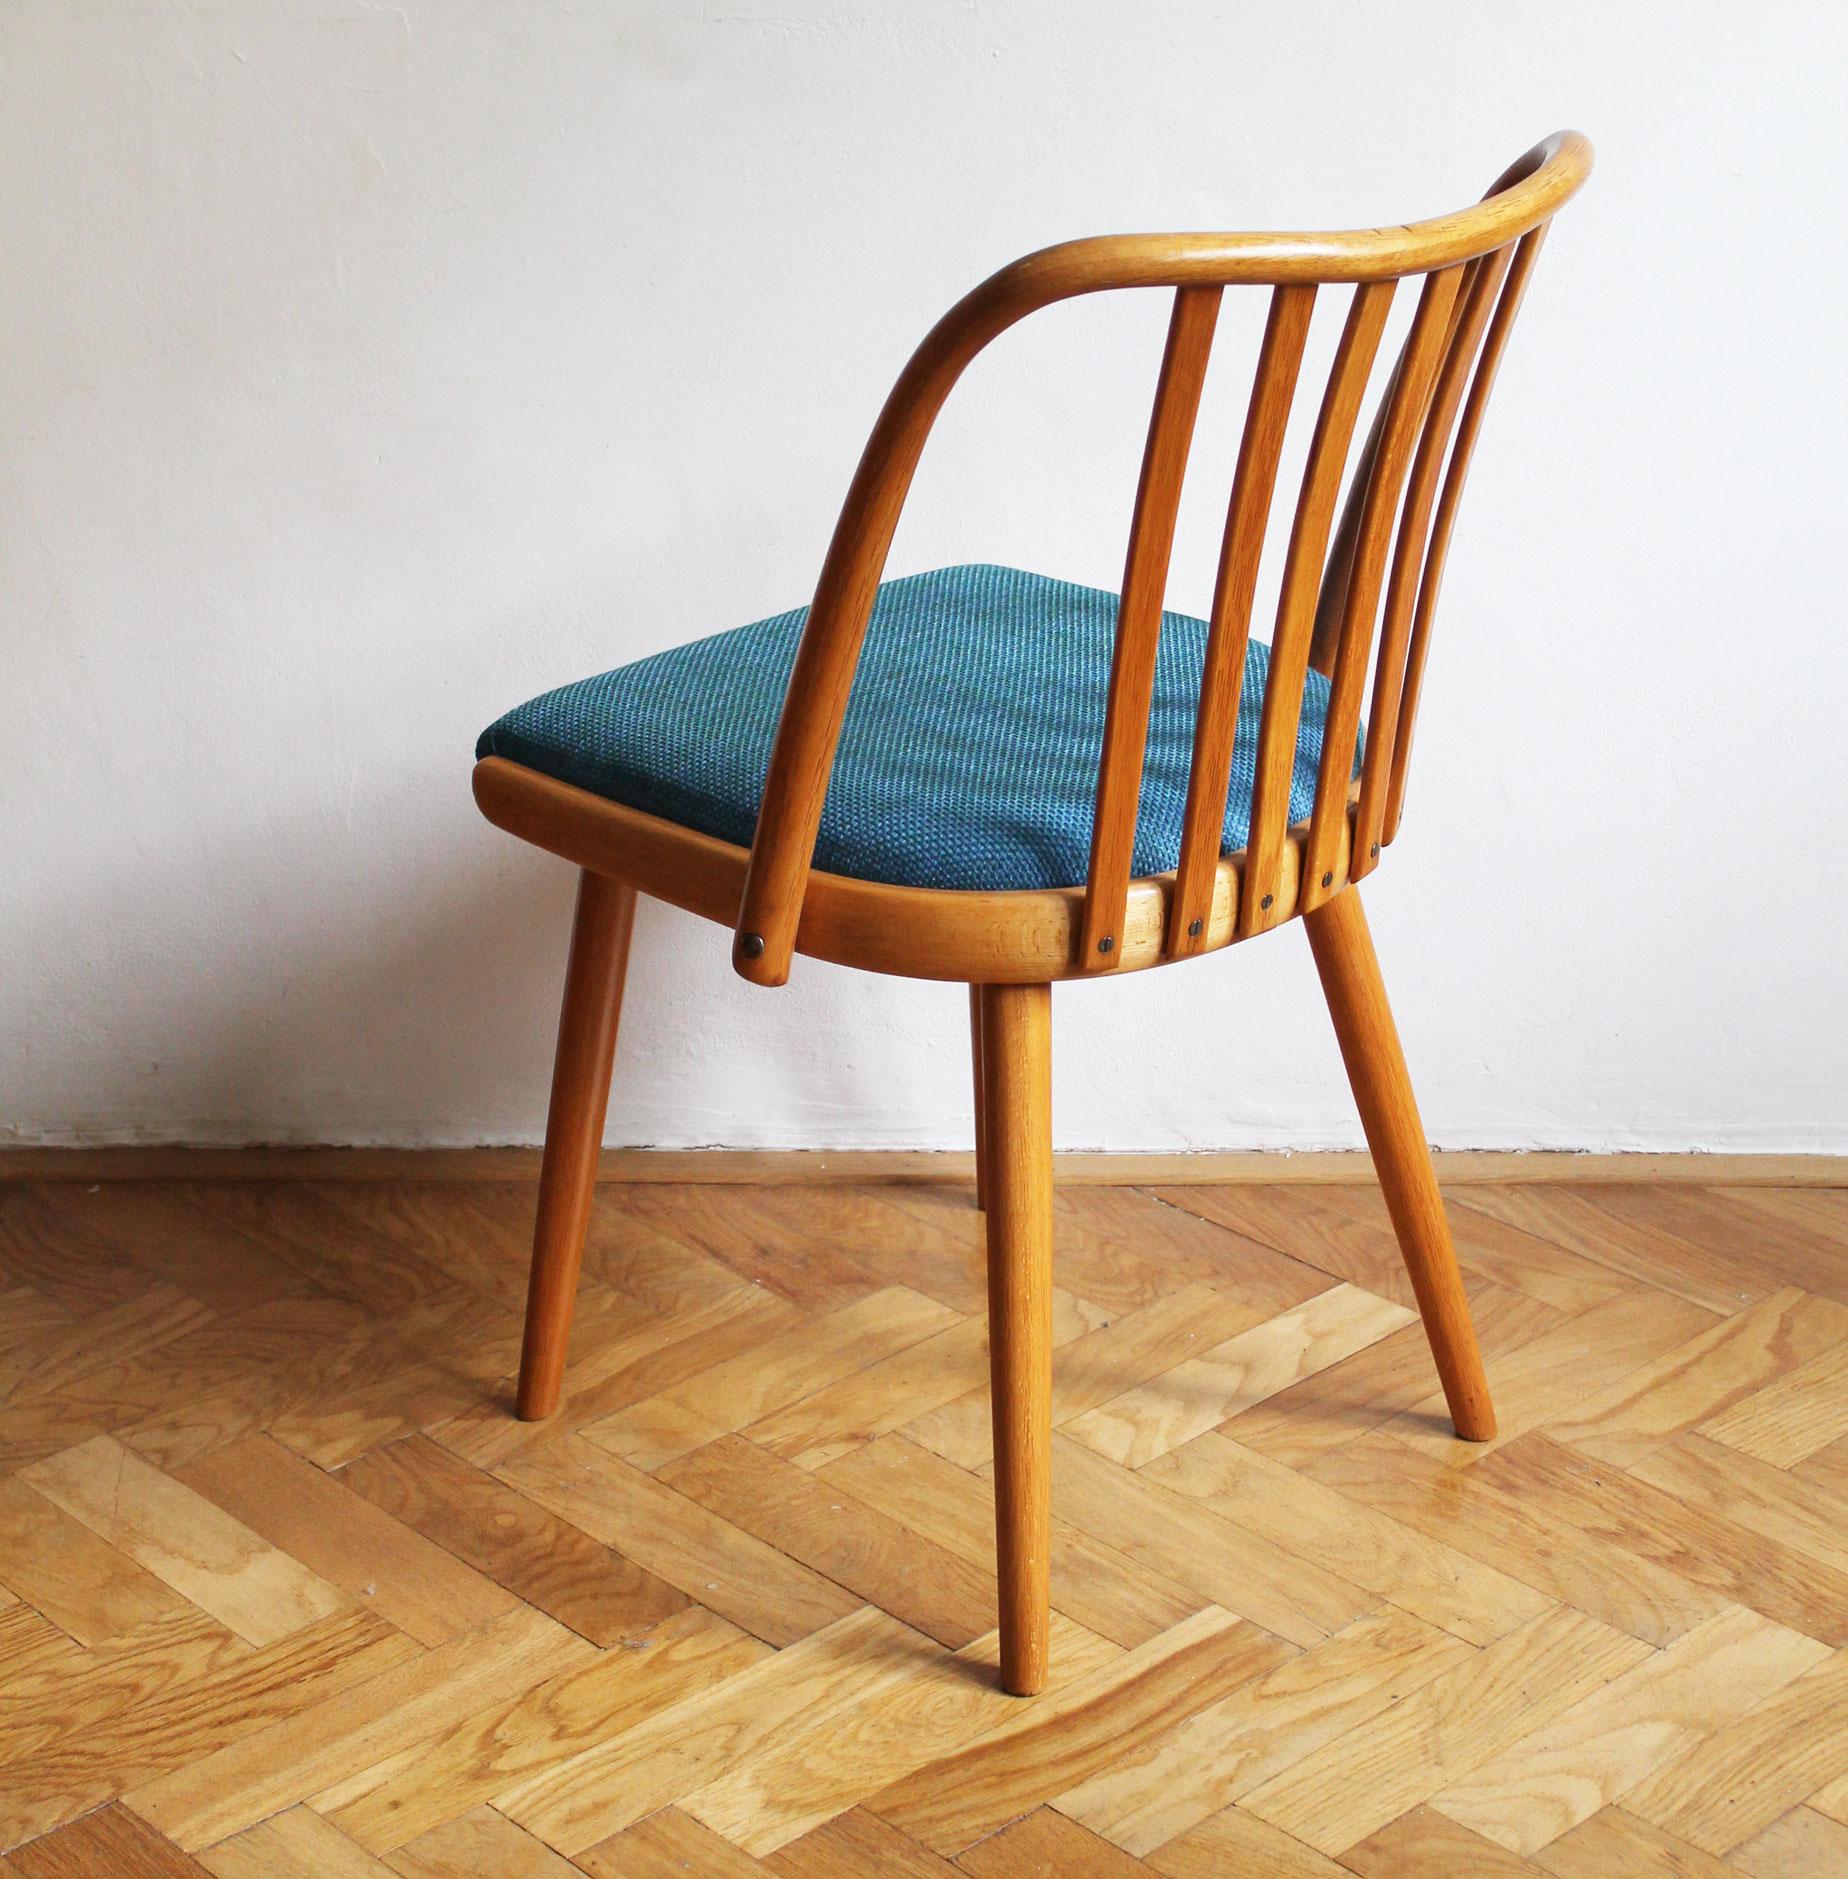 20th Century 1960's Mid Century Dining Chair Model U - 300 by Antonin Suman For Sale